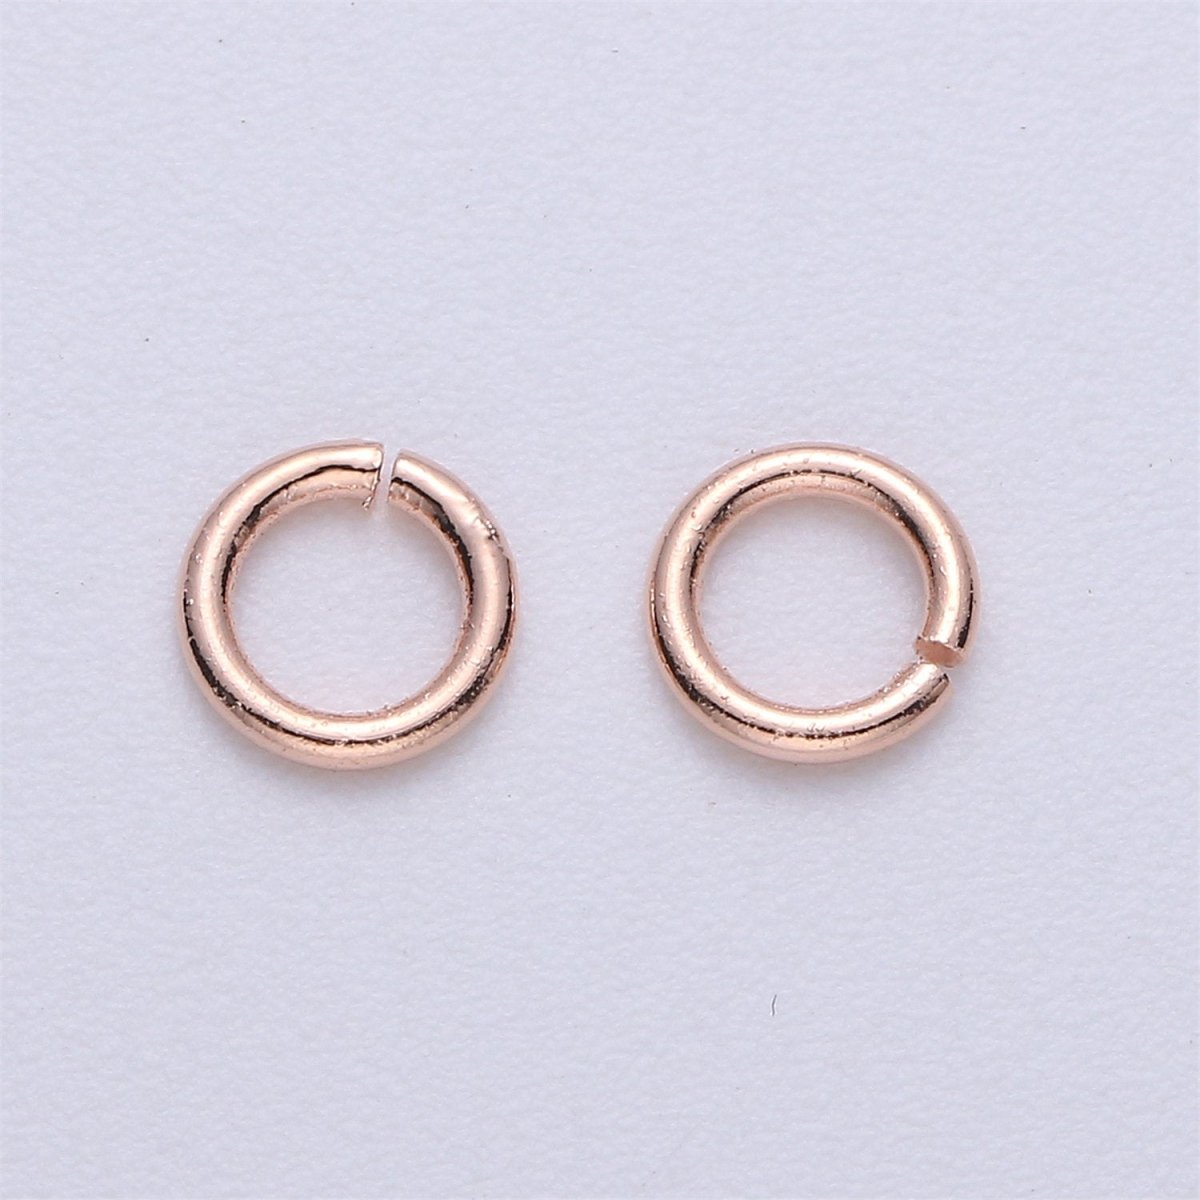 90pcs 6mm Gold Filled Open Jump Ring 6mm outer 18 gauge / 1mm, Rose Gold, Rhodium Plated, Black Gun Metal O jump Ring for supply O-028 ~ O-031 - DLUXCA